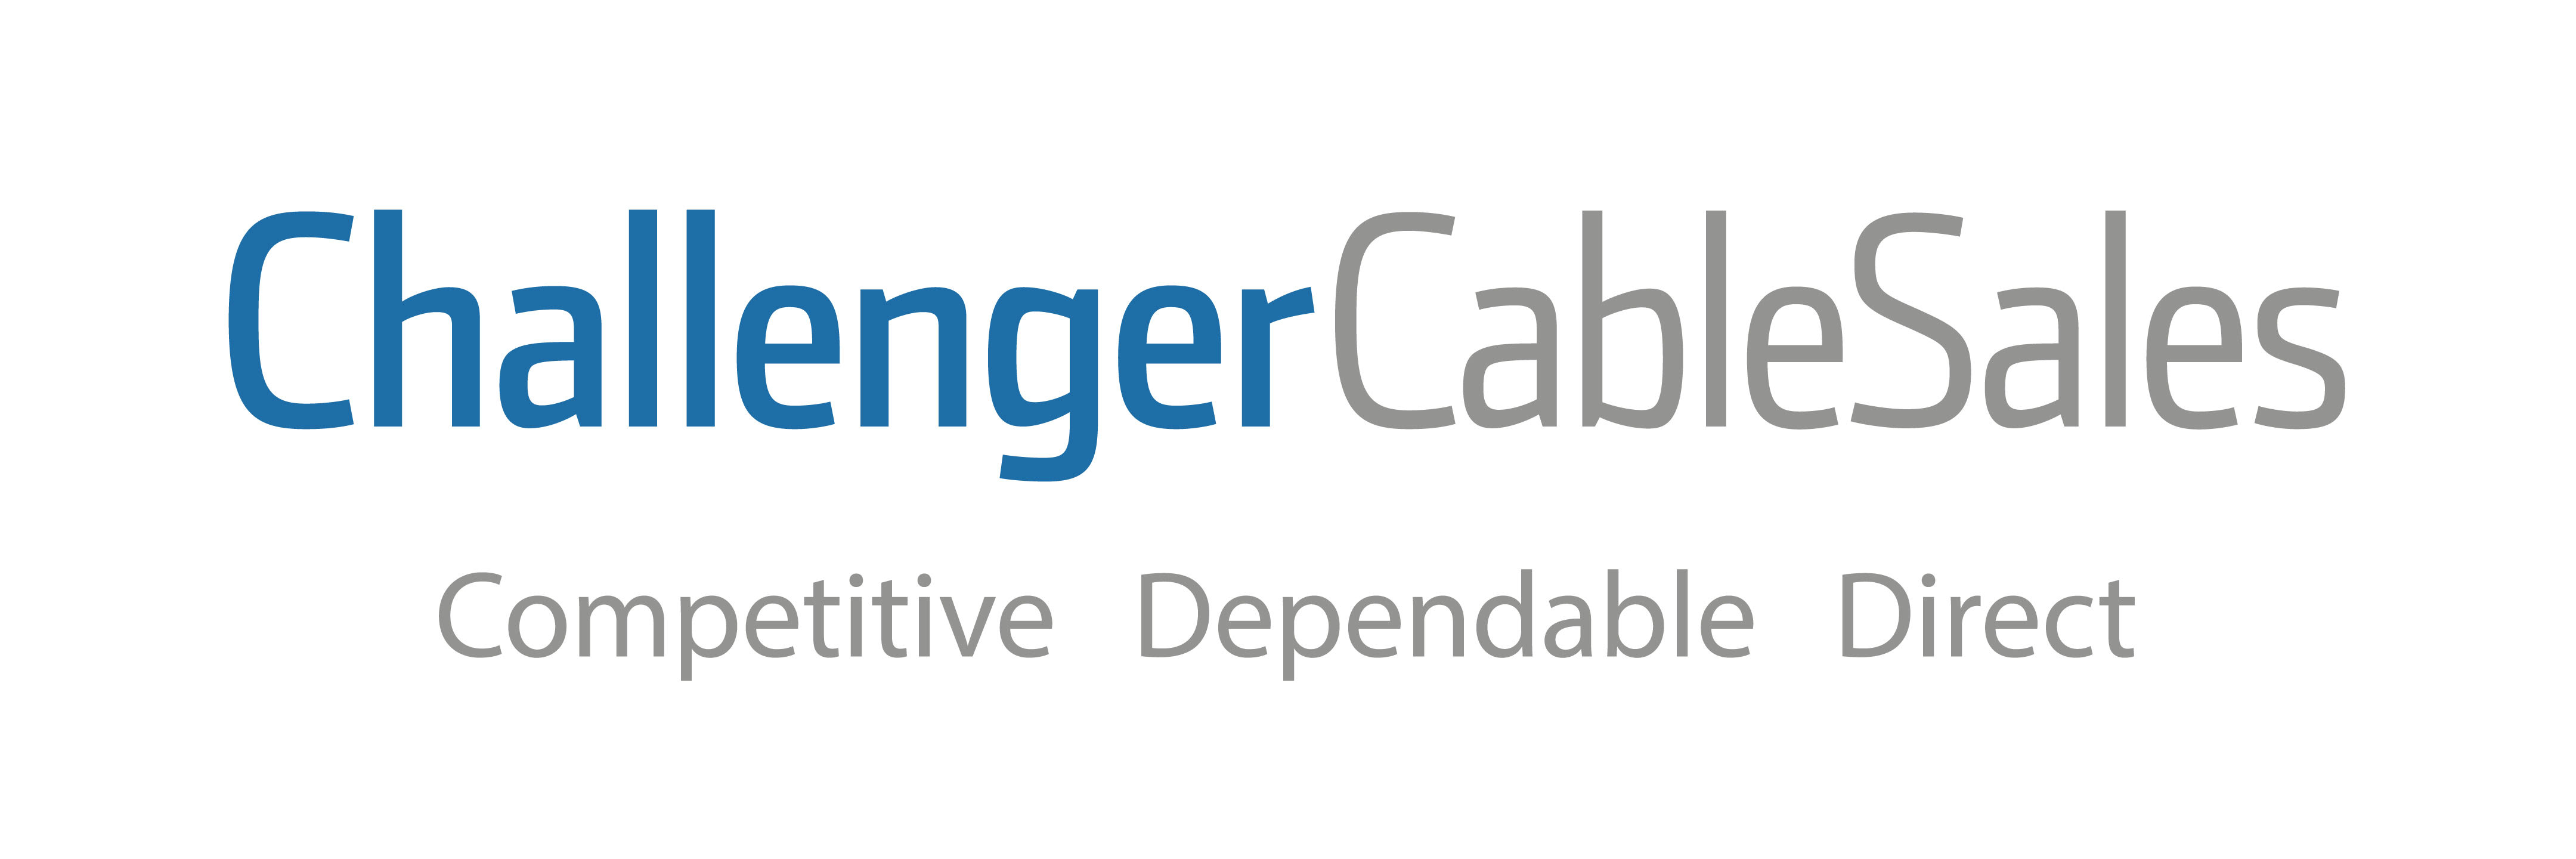 challenger cable